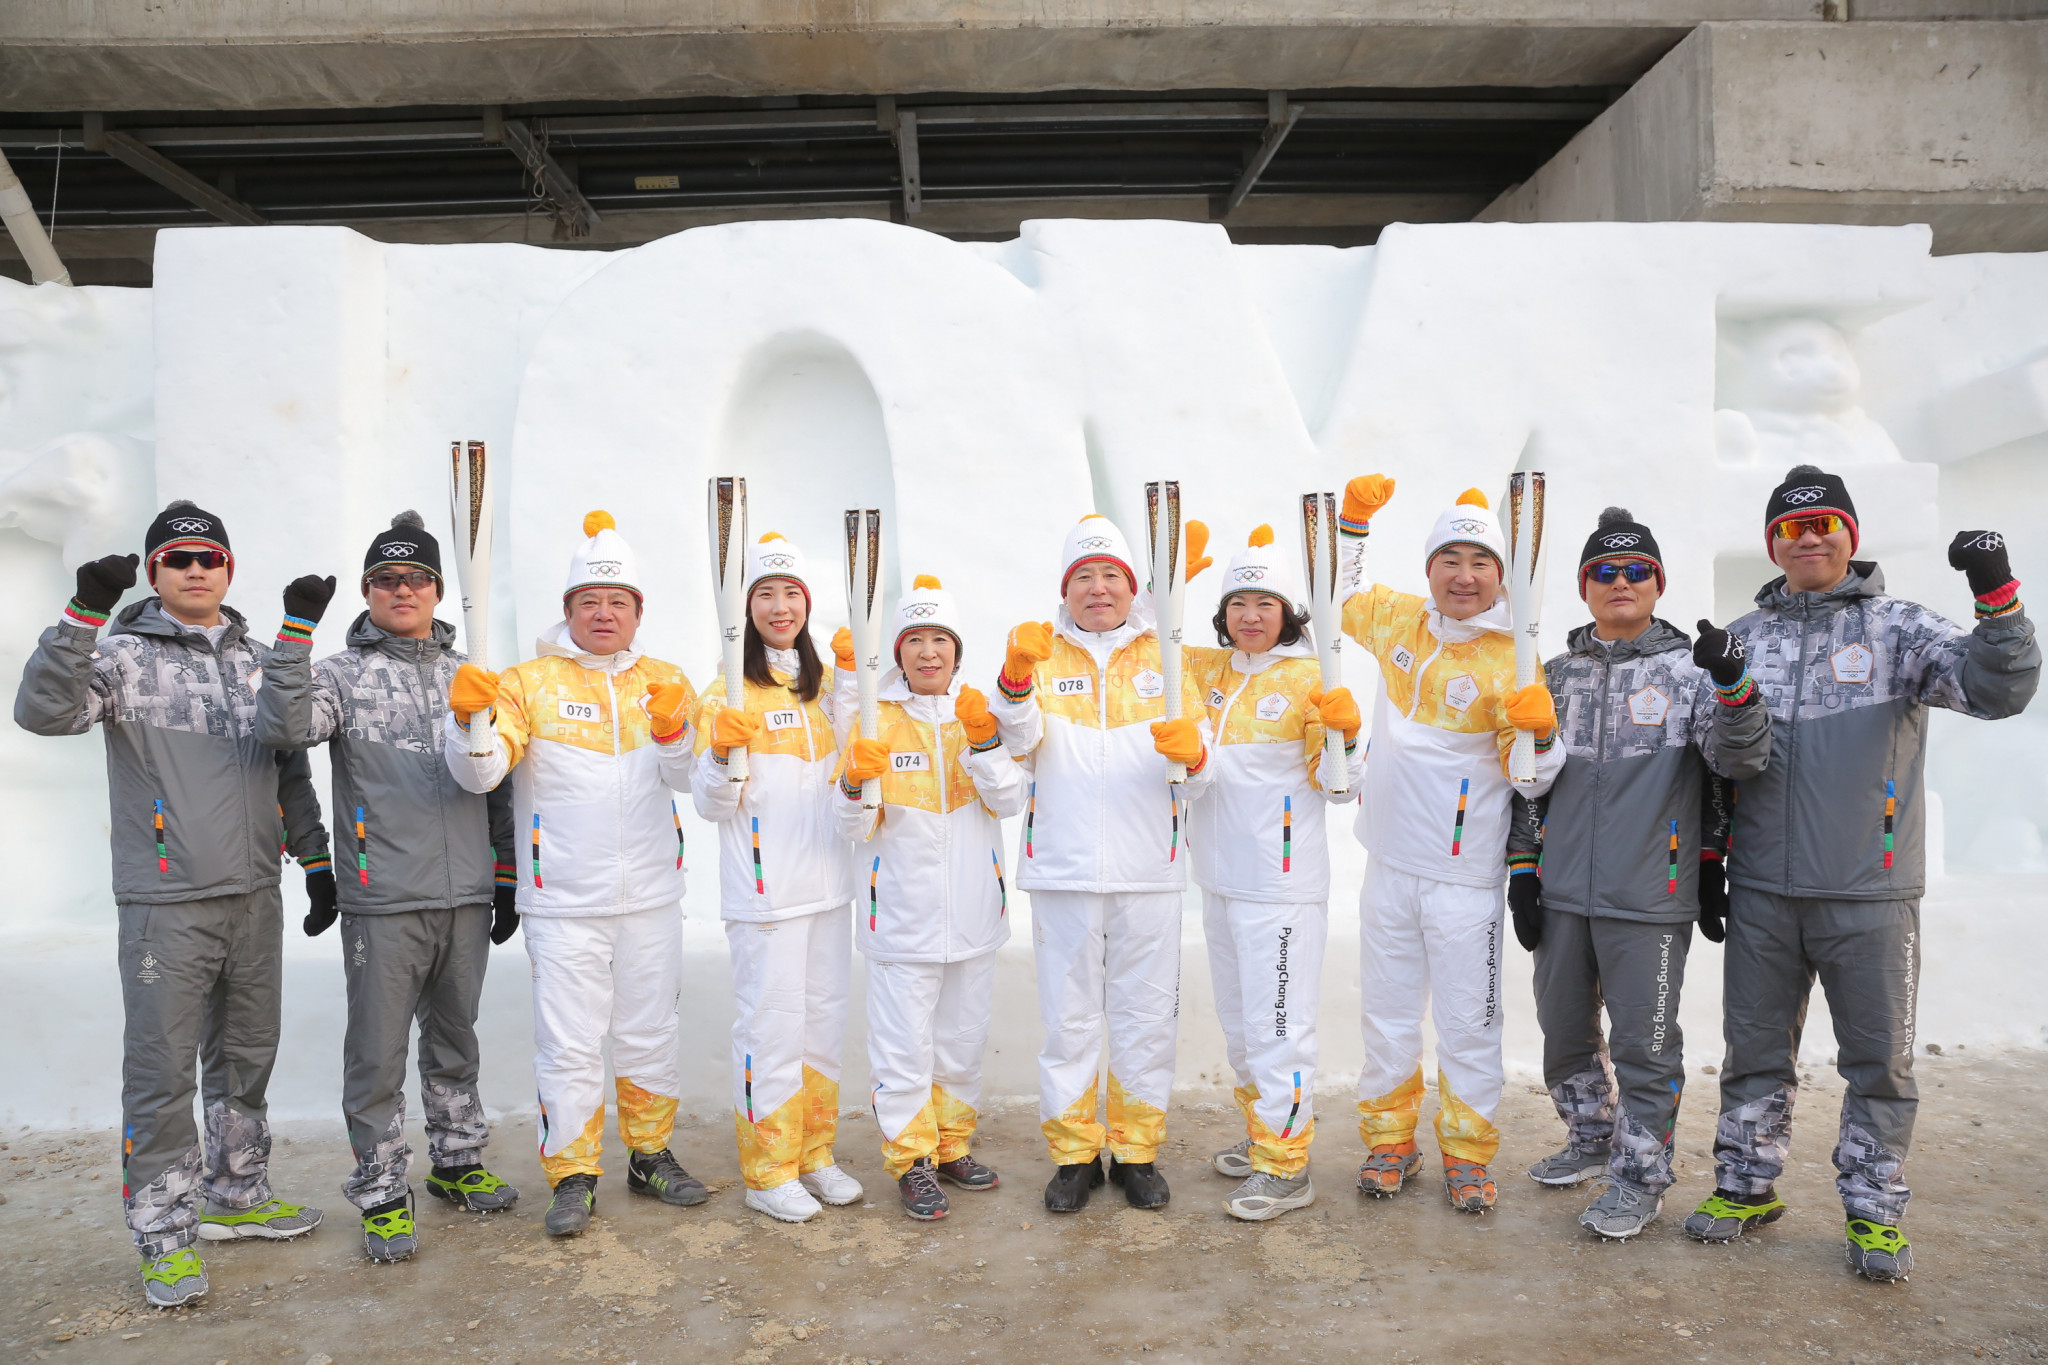 Torchbearers gather in front of an ice carving ©Pyeongchang 2018